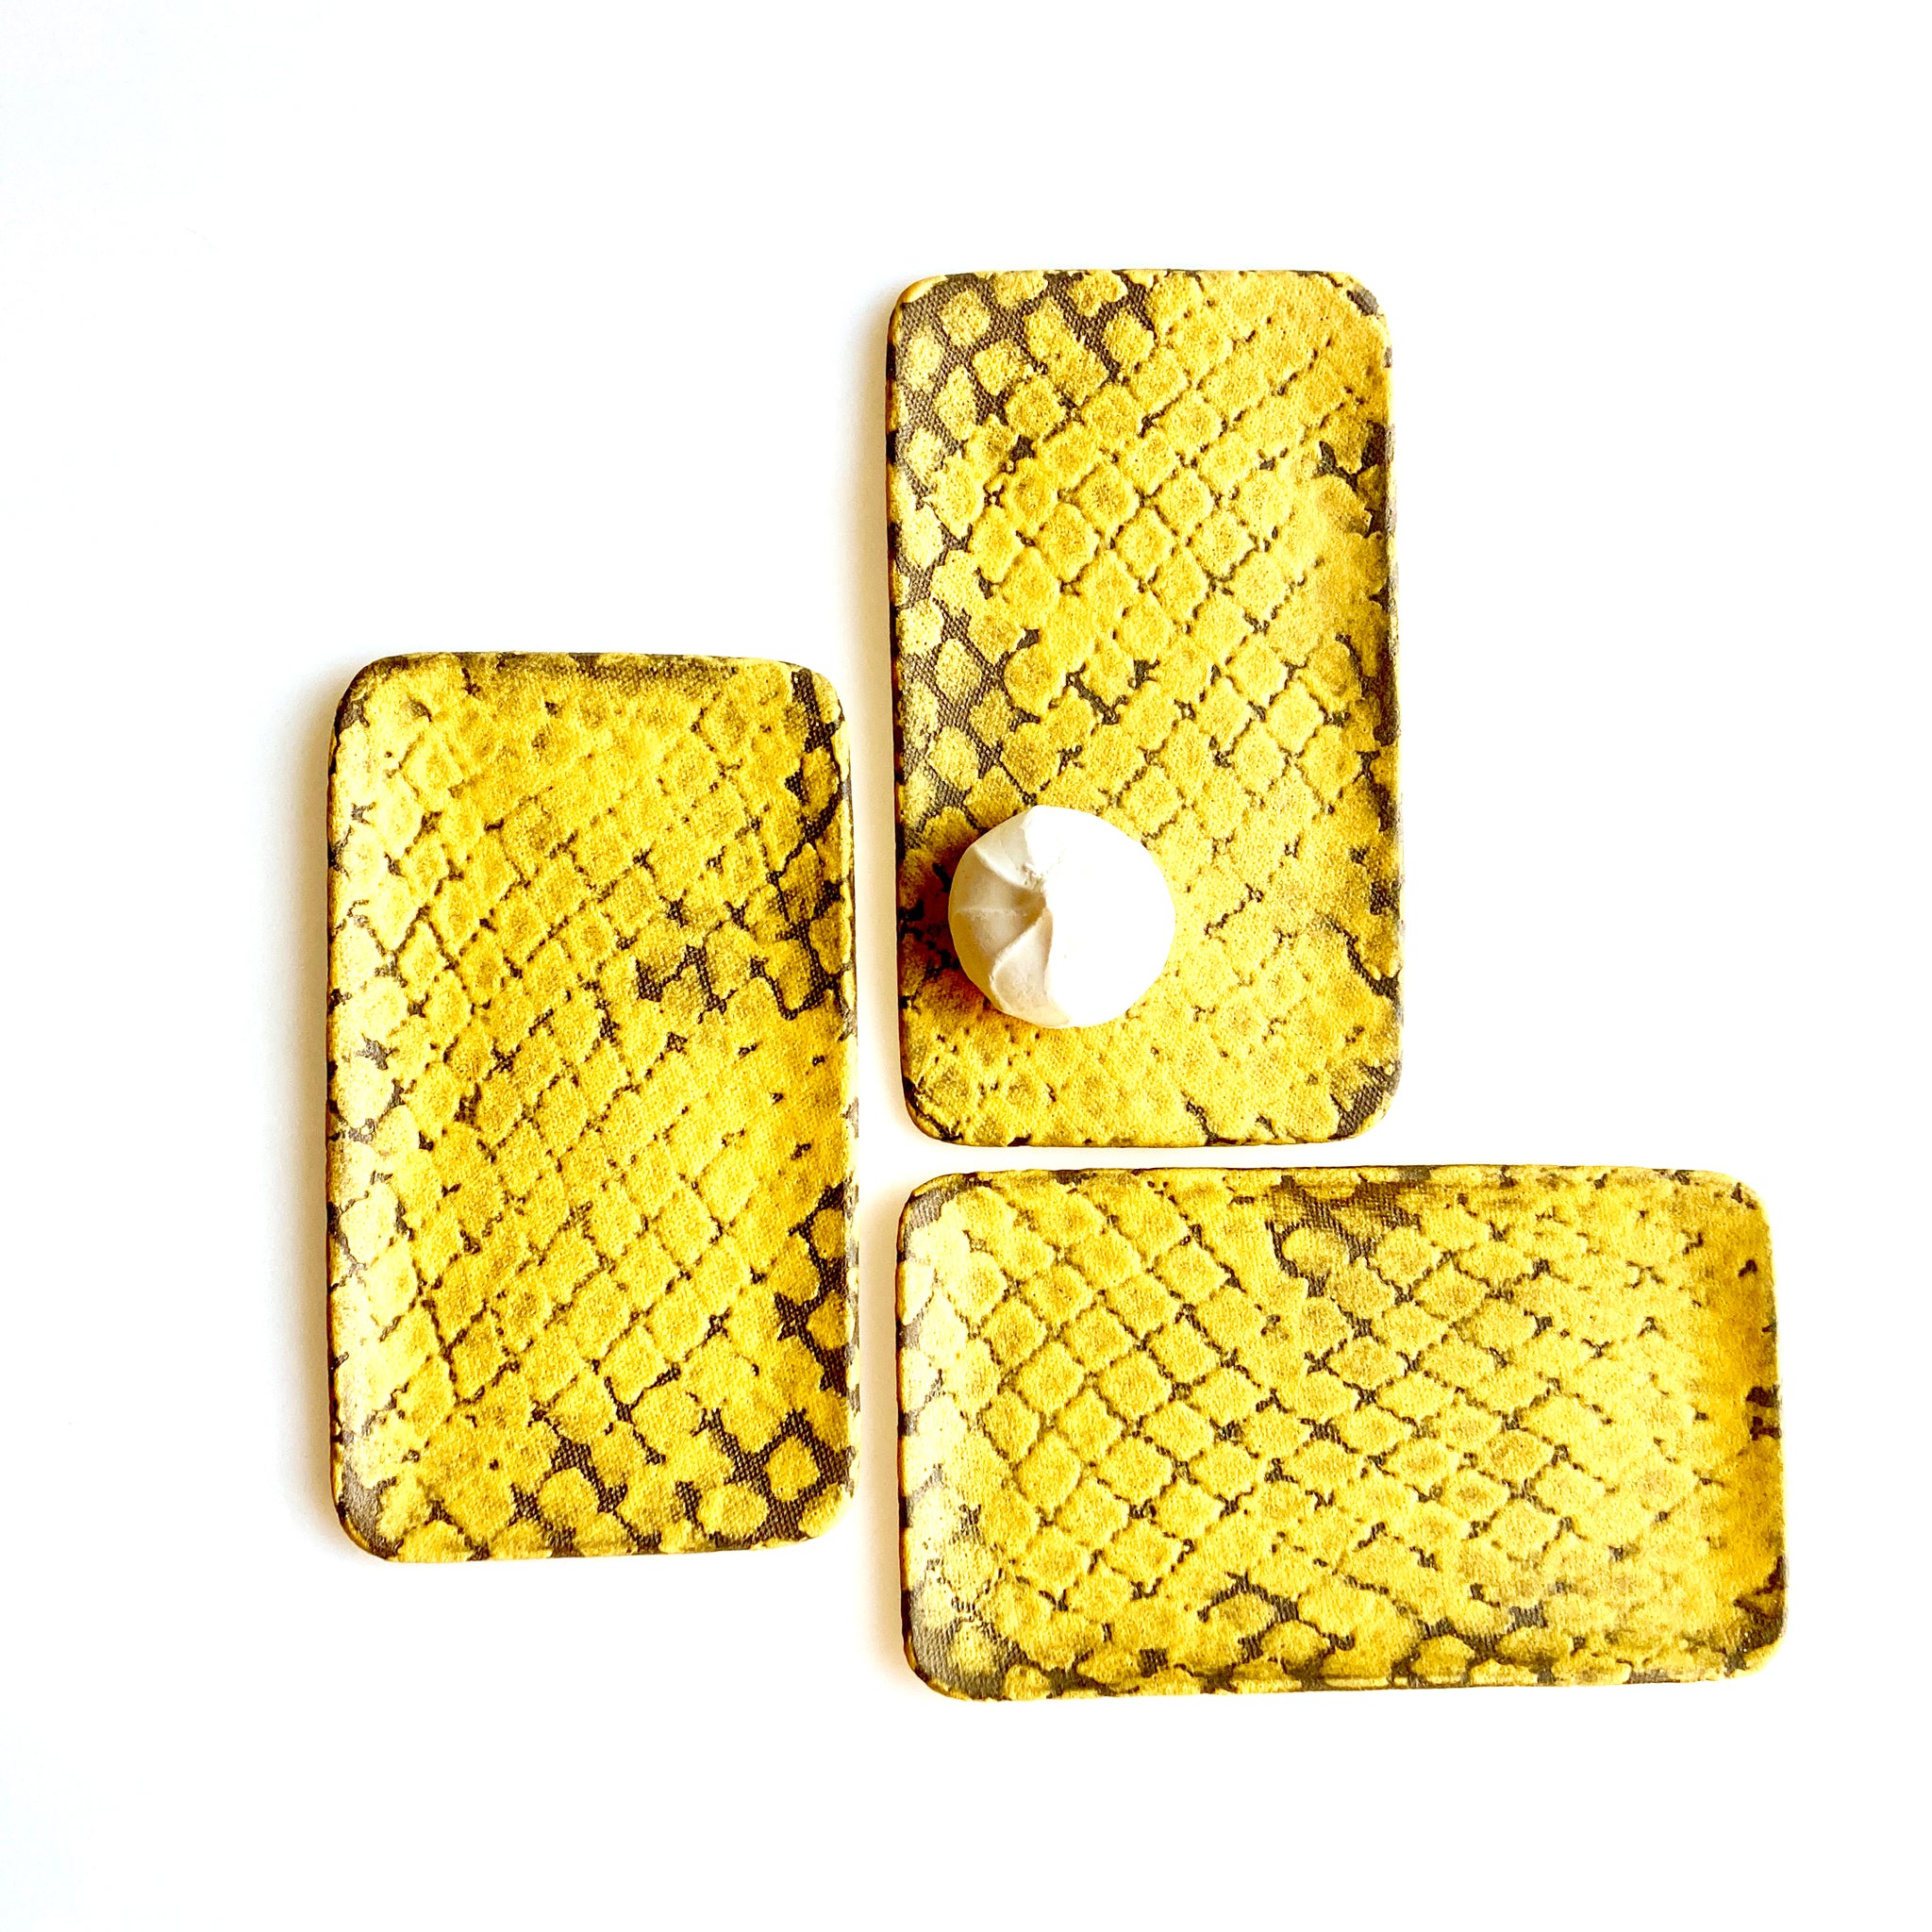 Turmeric Small Appetizer Plate, Set of 3